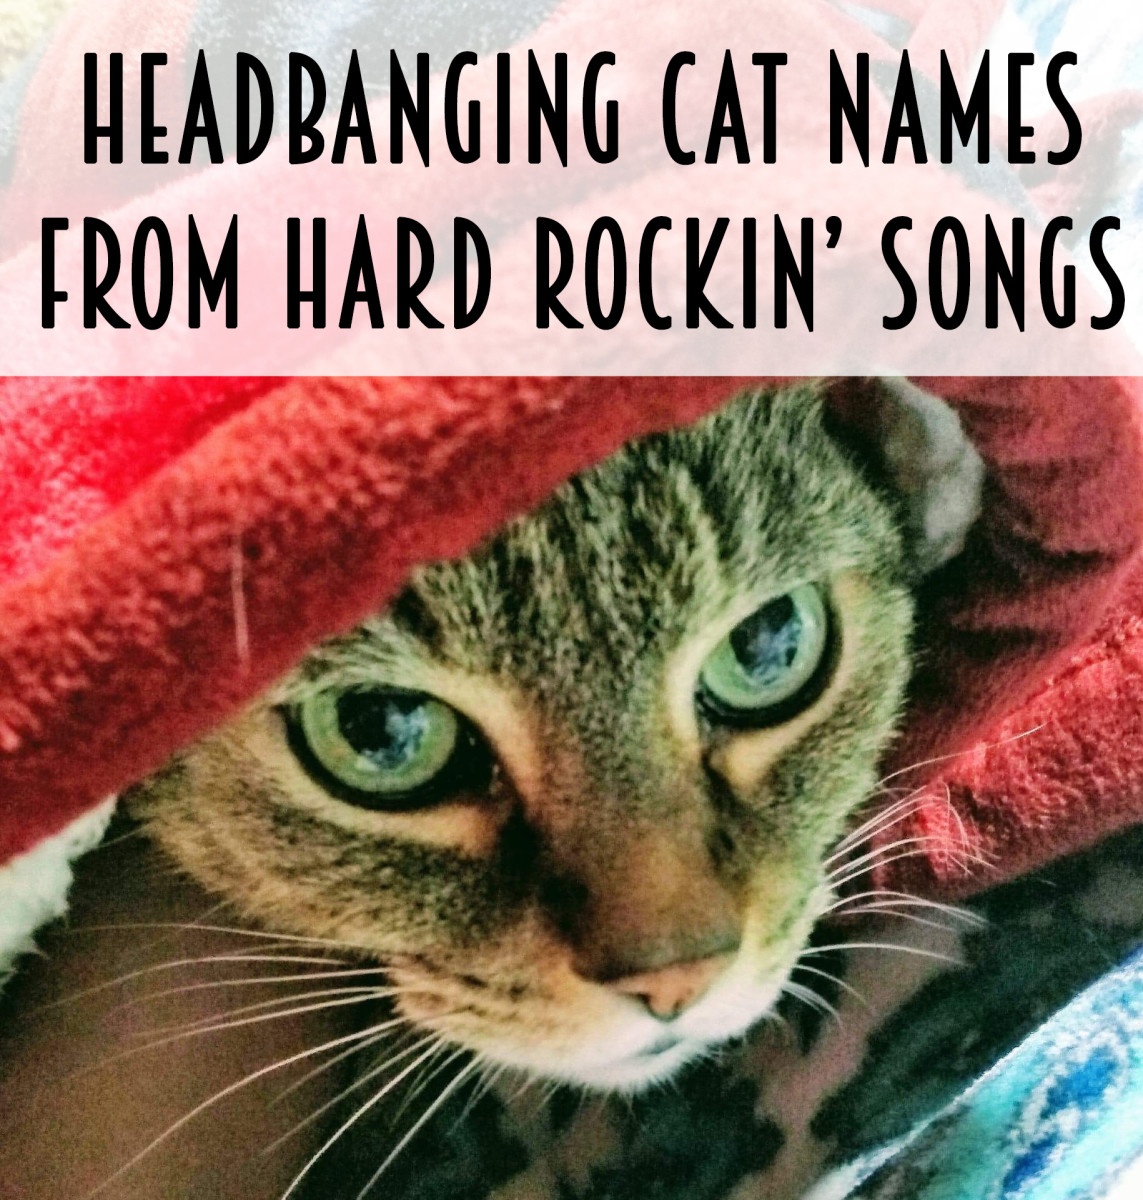 Any headbanging cat deserves a name from this list of hard rock songs.